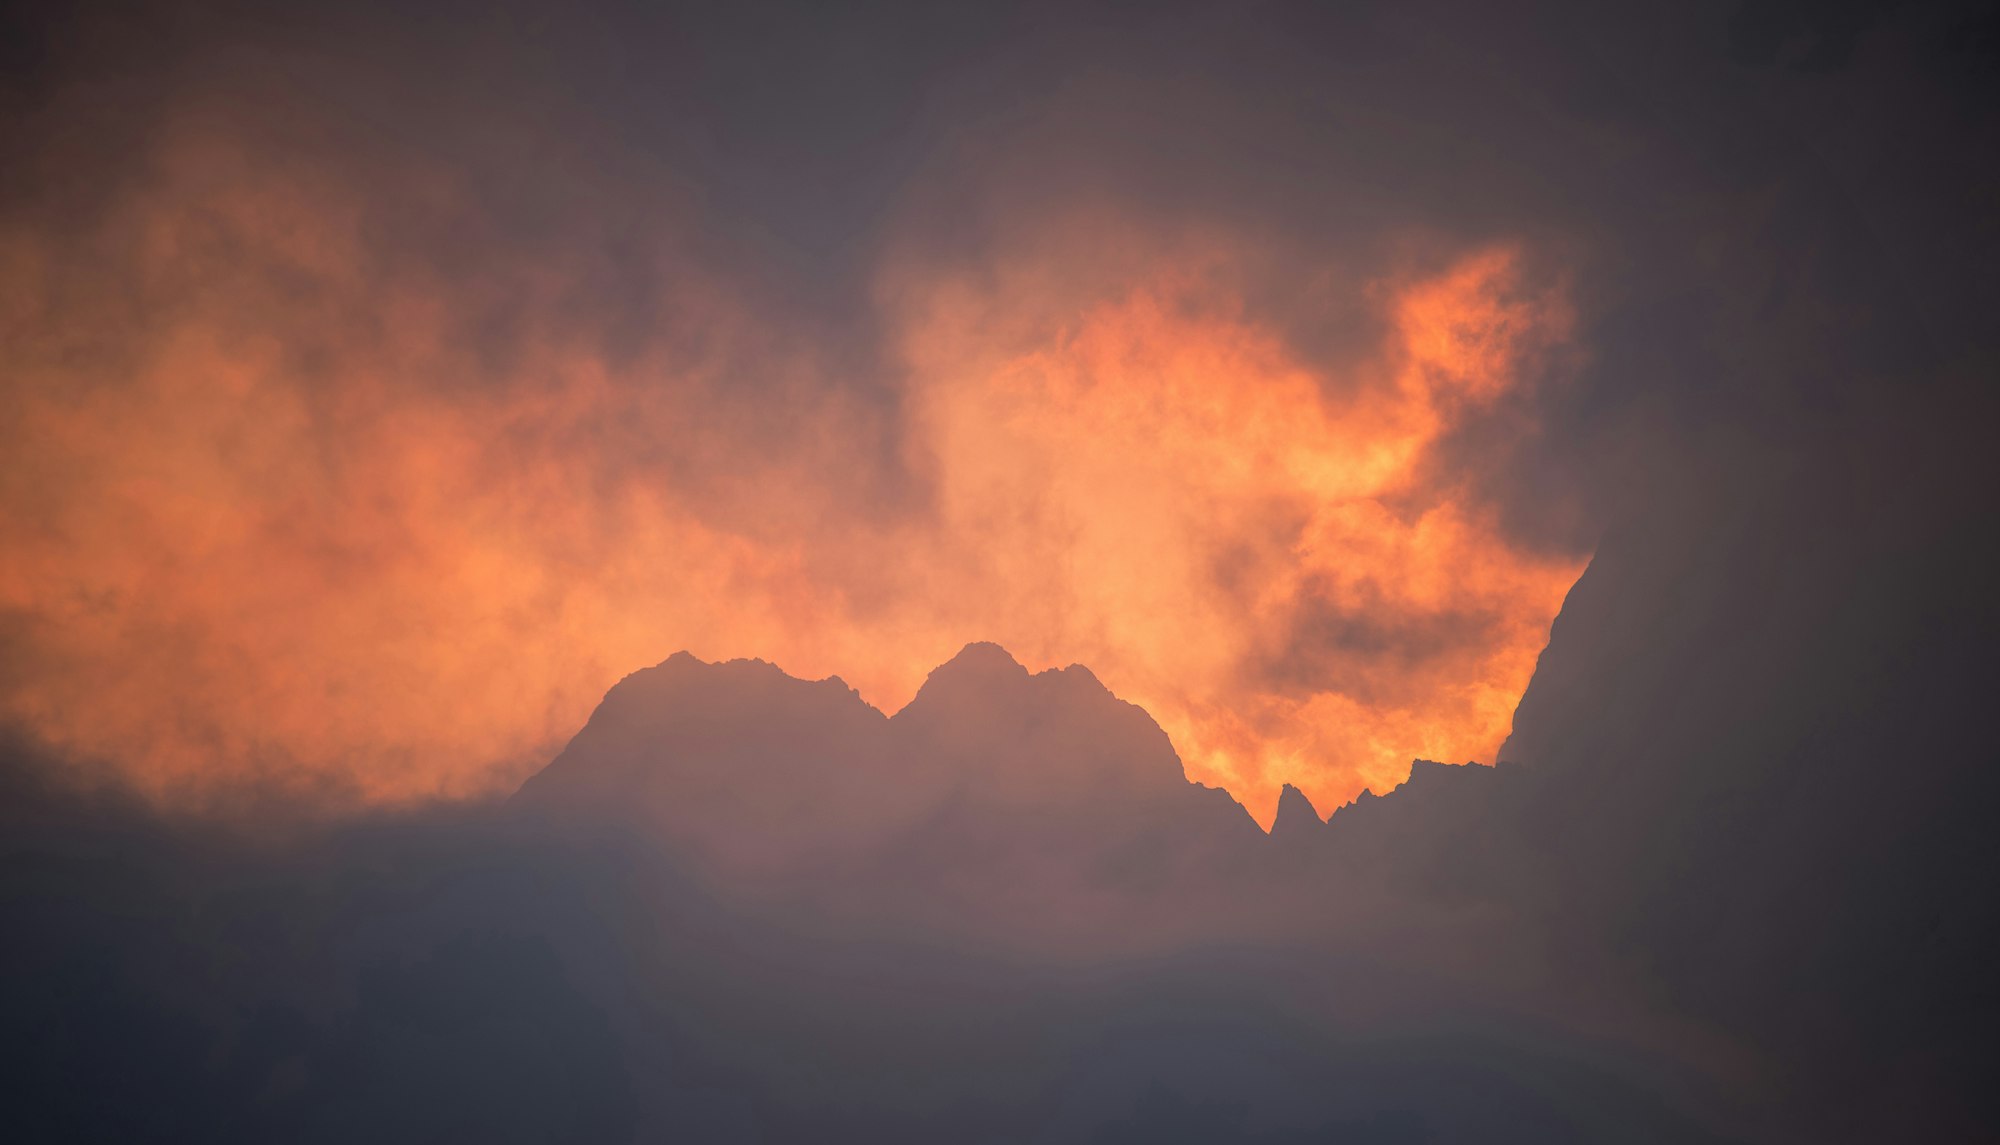 Burning fire at sunrise in the mountains